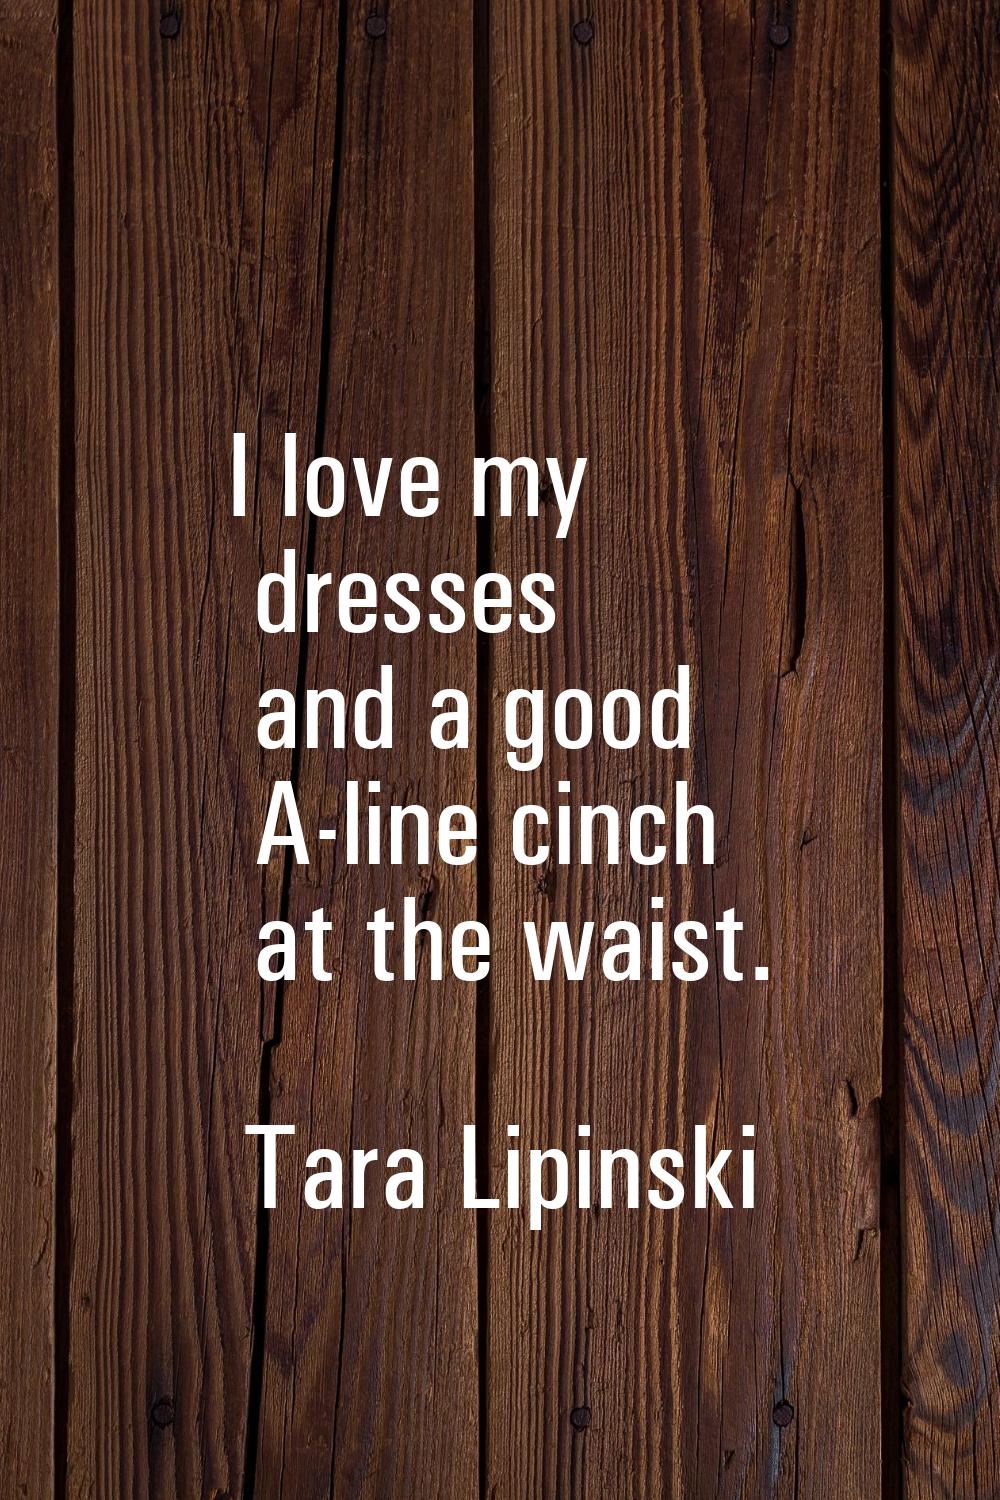 I love my dresses and a good A-line cinch at the waist.